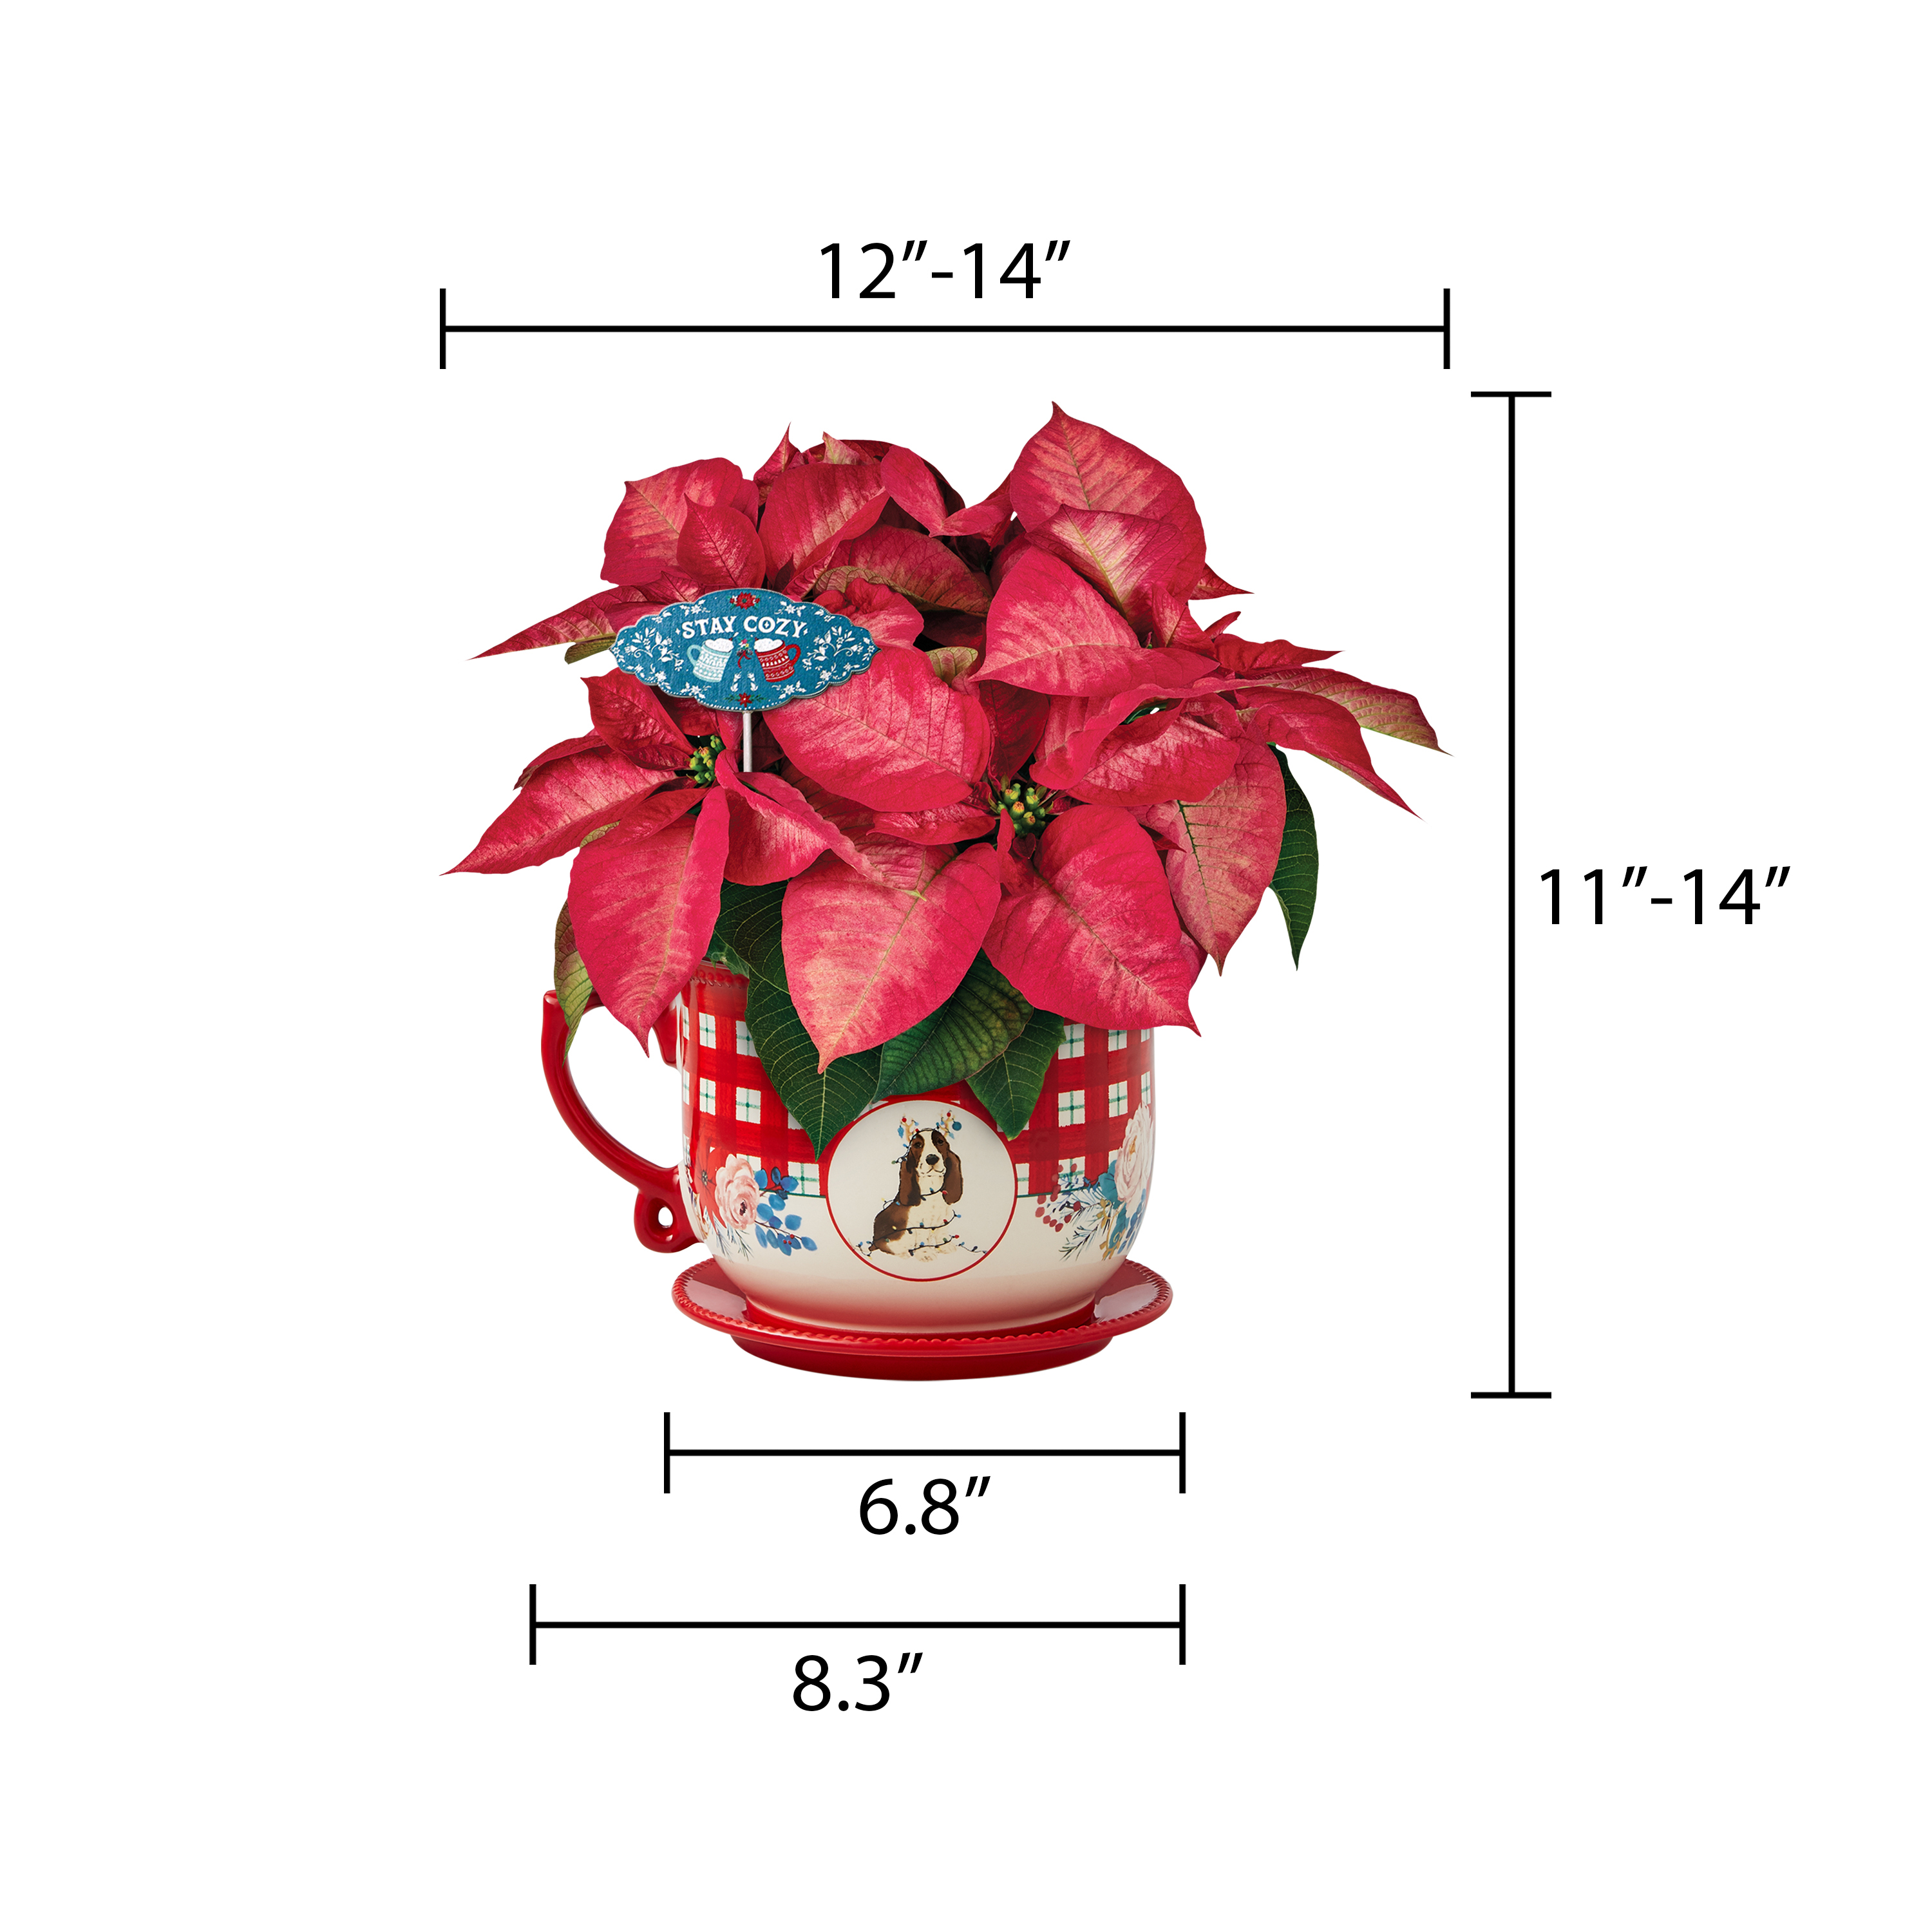 The Pioneer Woman Dark Pink Poinsettia Live Plant in 6" Mug Planter - image 9 of 9